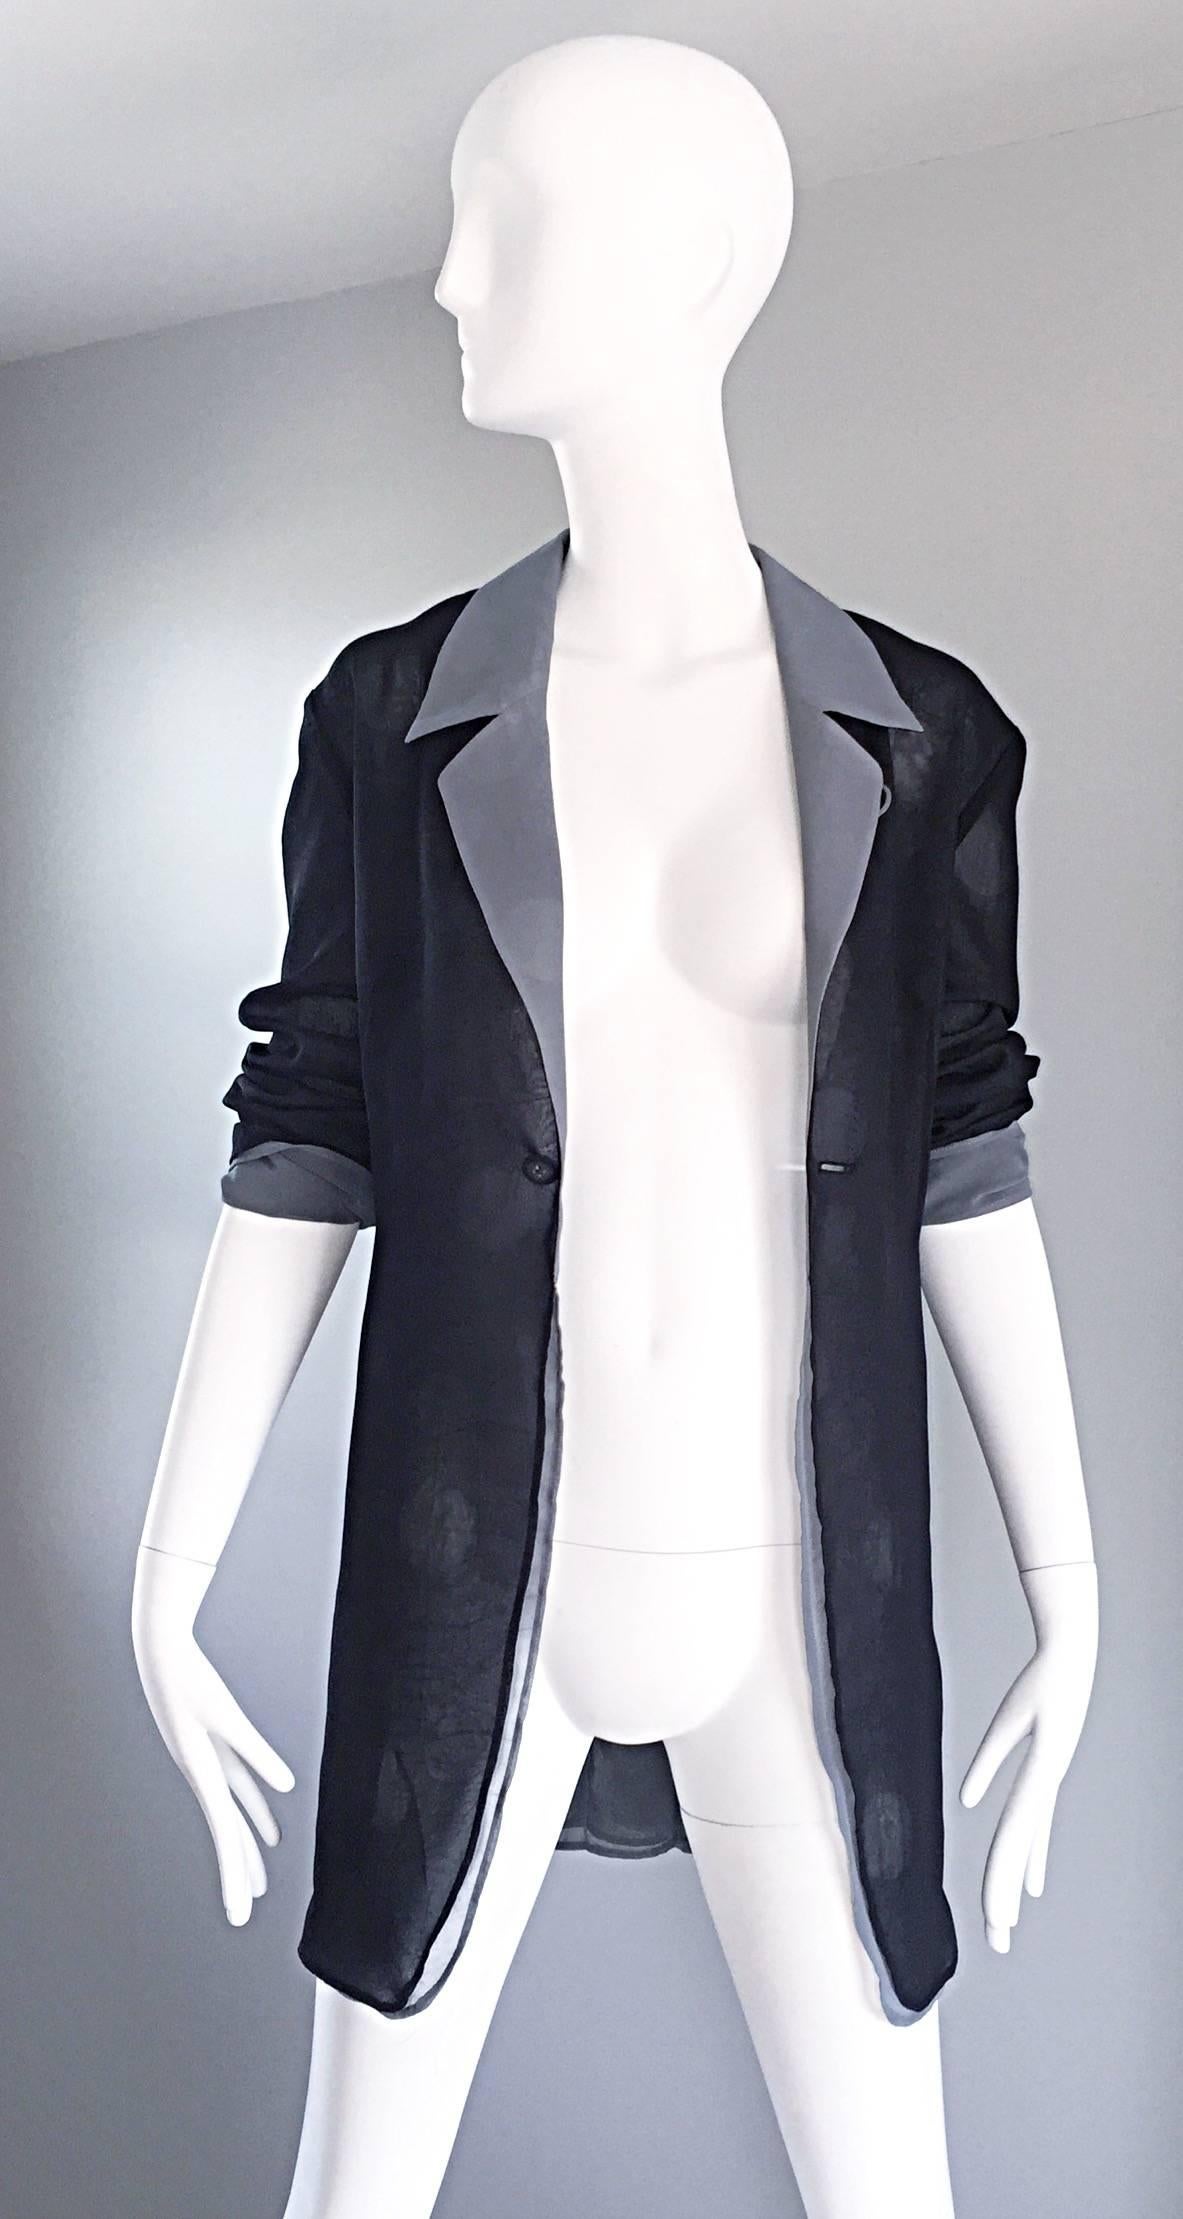 Avant Garde vintage 1990s Japanese MATSUDA blazer jacket! Features a grey chiffon underlay with black chiffon on top. Black features semi sheer polka dots that reveal the gray from underneath. Can be worn as a chic jacket or blazer! Button below